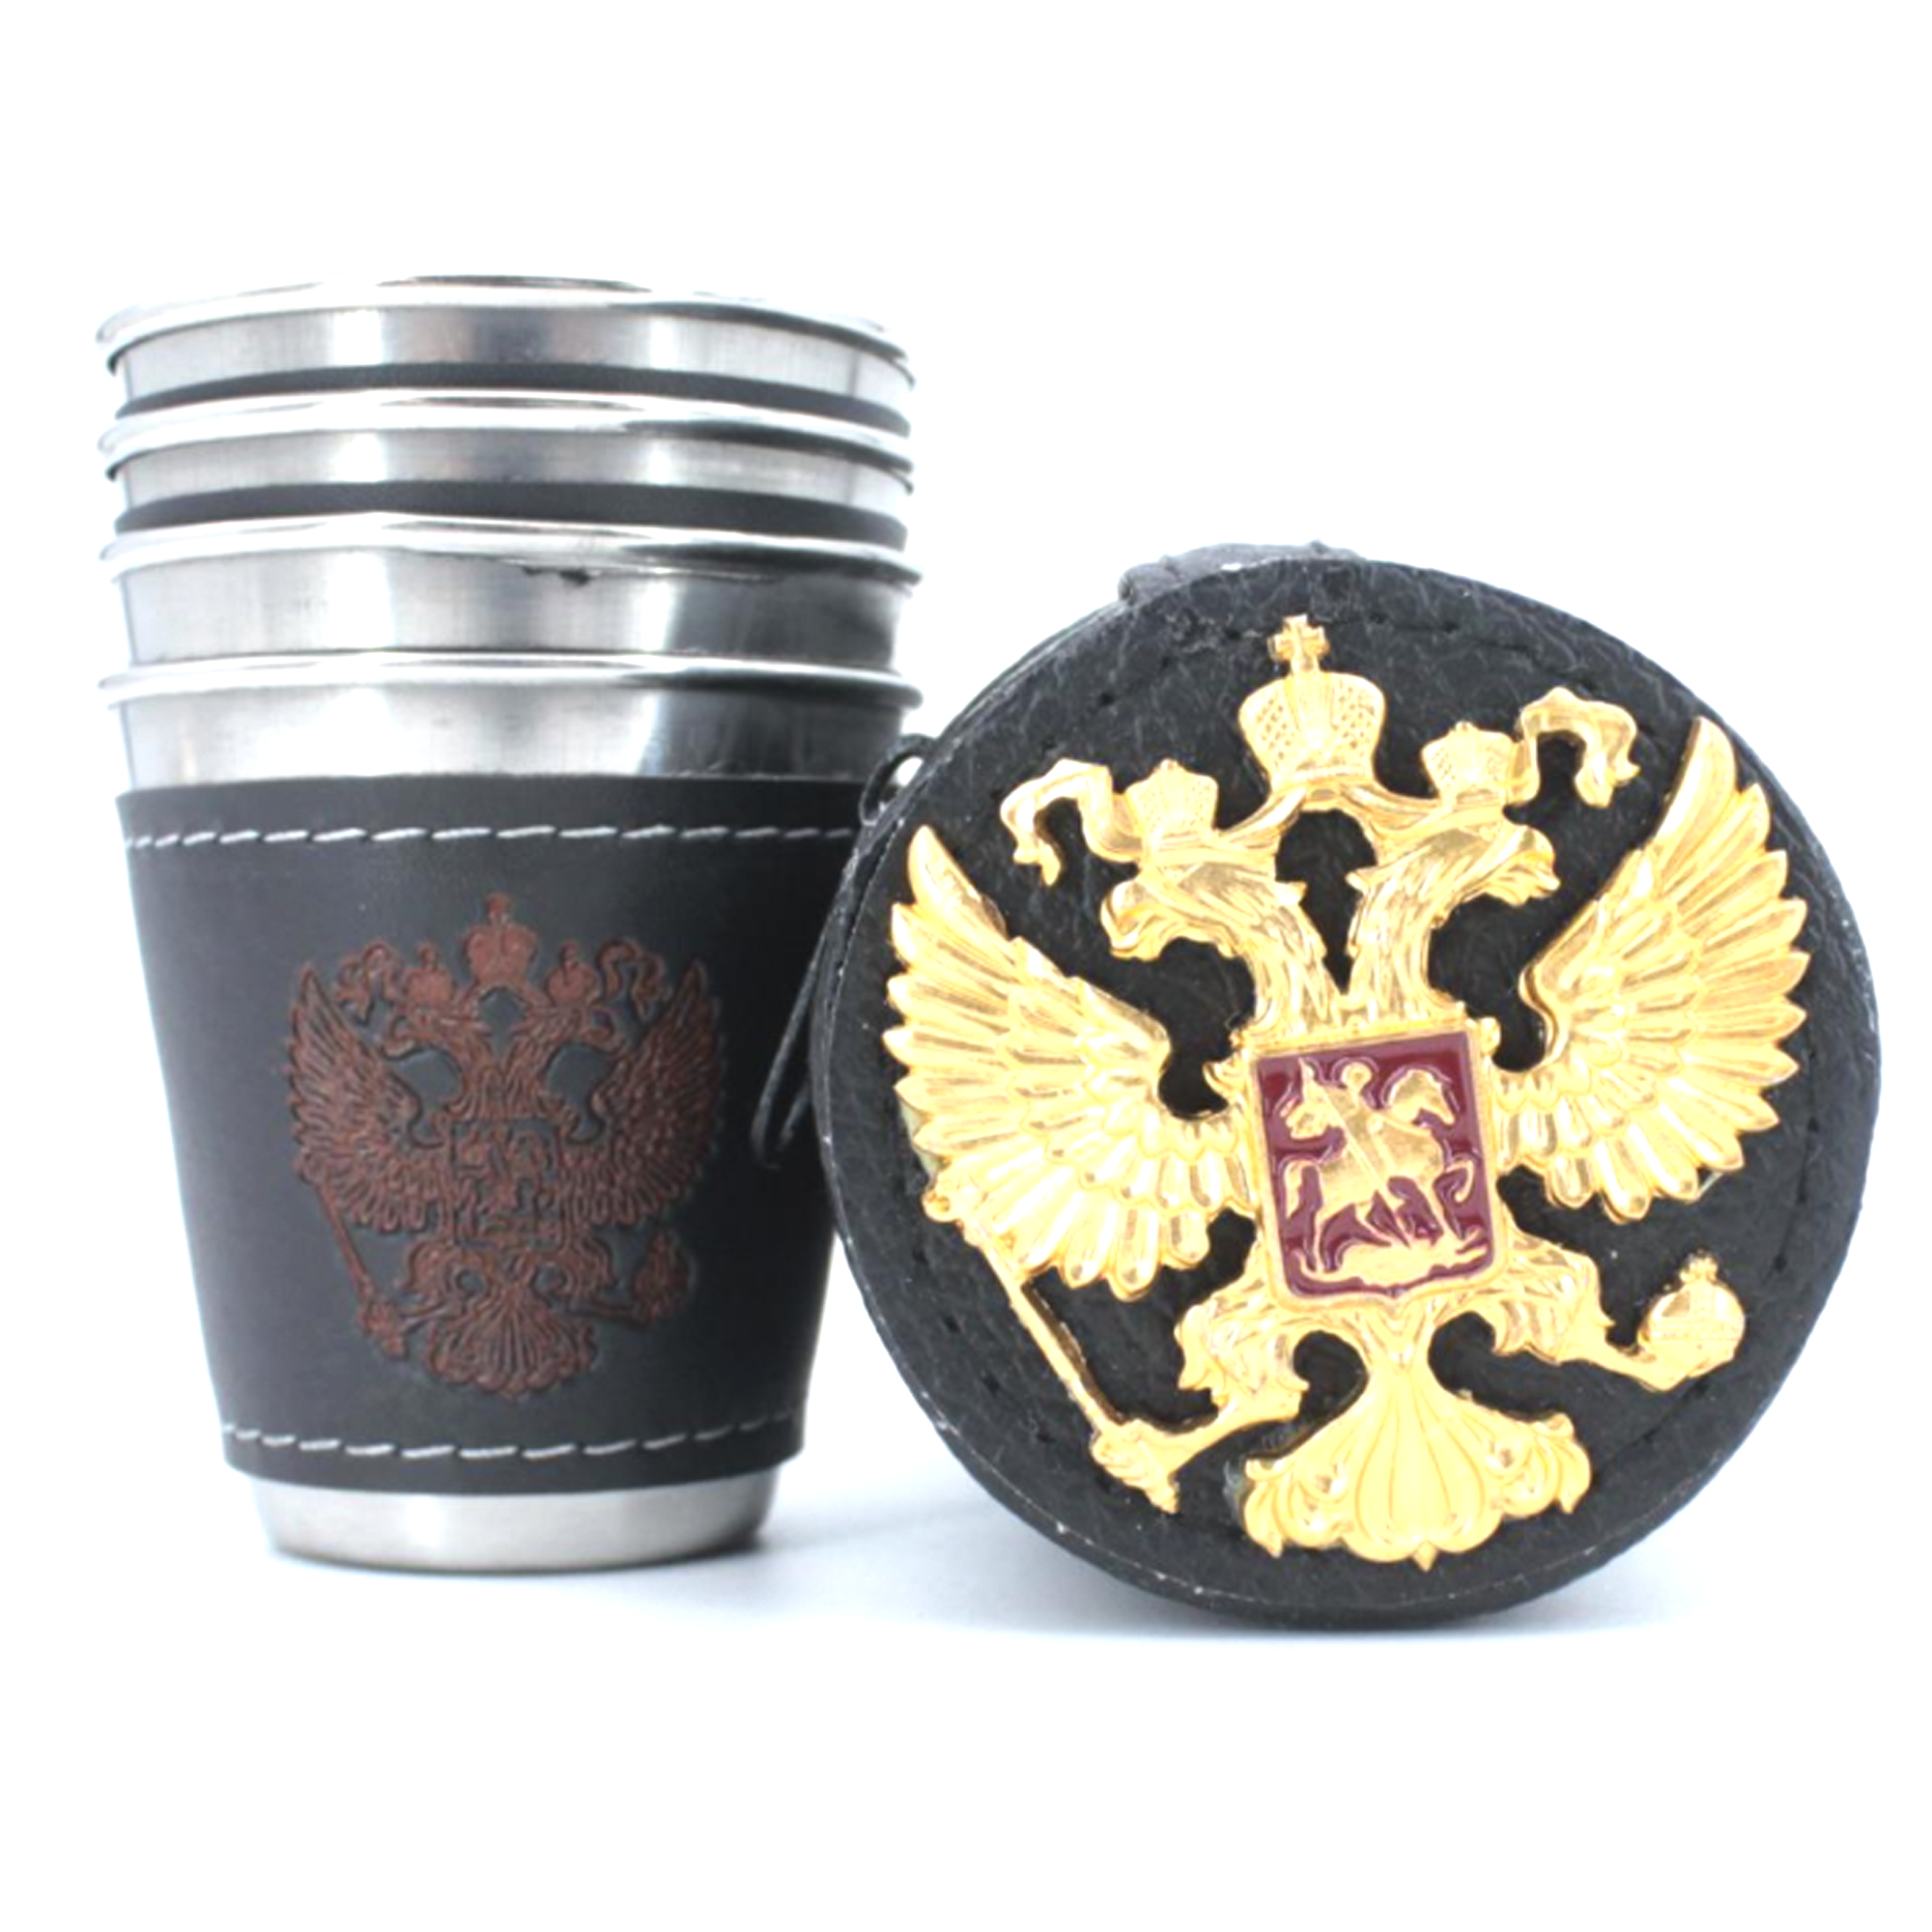 Stainless Steel Shot Glass Russian Symbols 4 items in Сase, 30ml